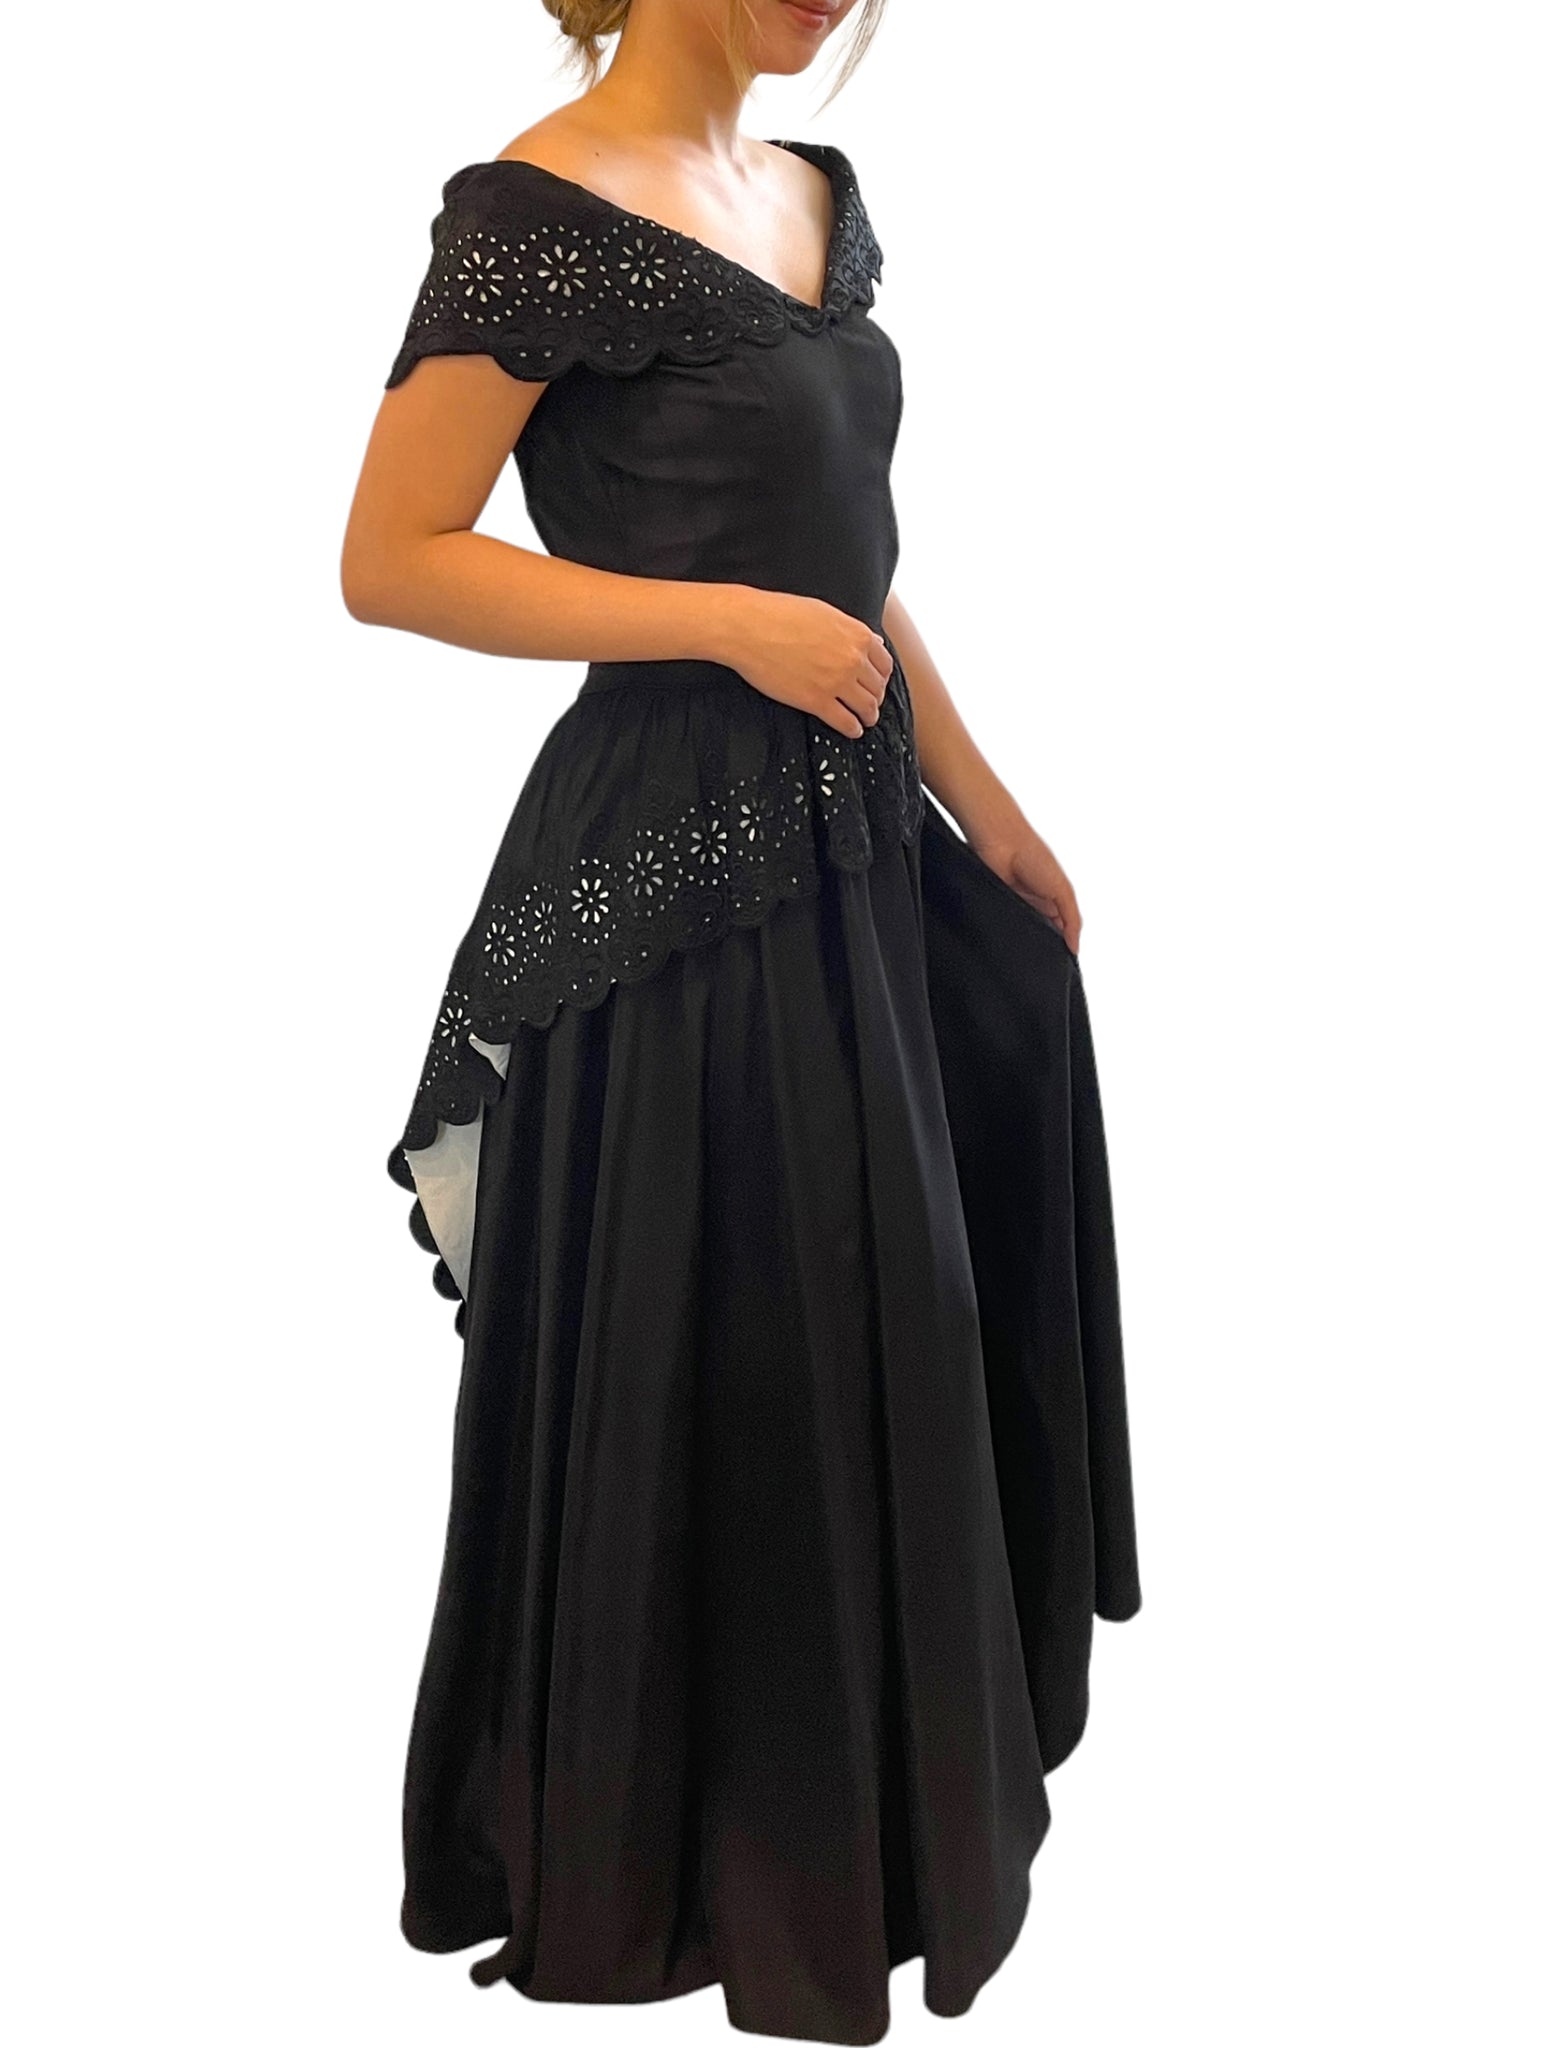 Channelling Audrey 1950s Off Shoulder Black-tie Evening Dress  Maxi Truly one-of-a-kind.